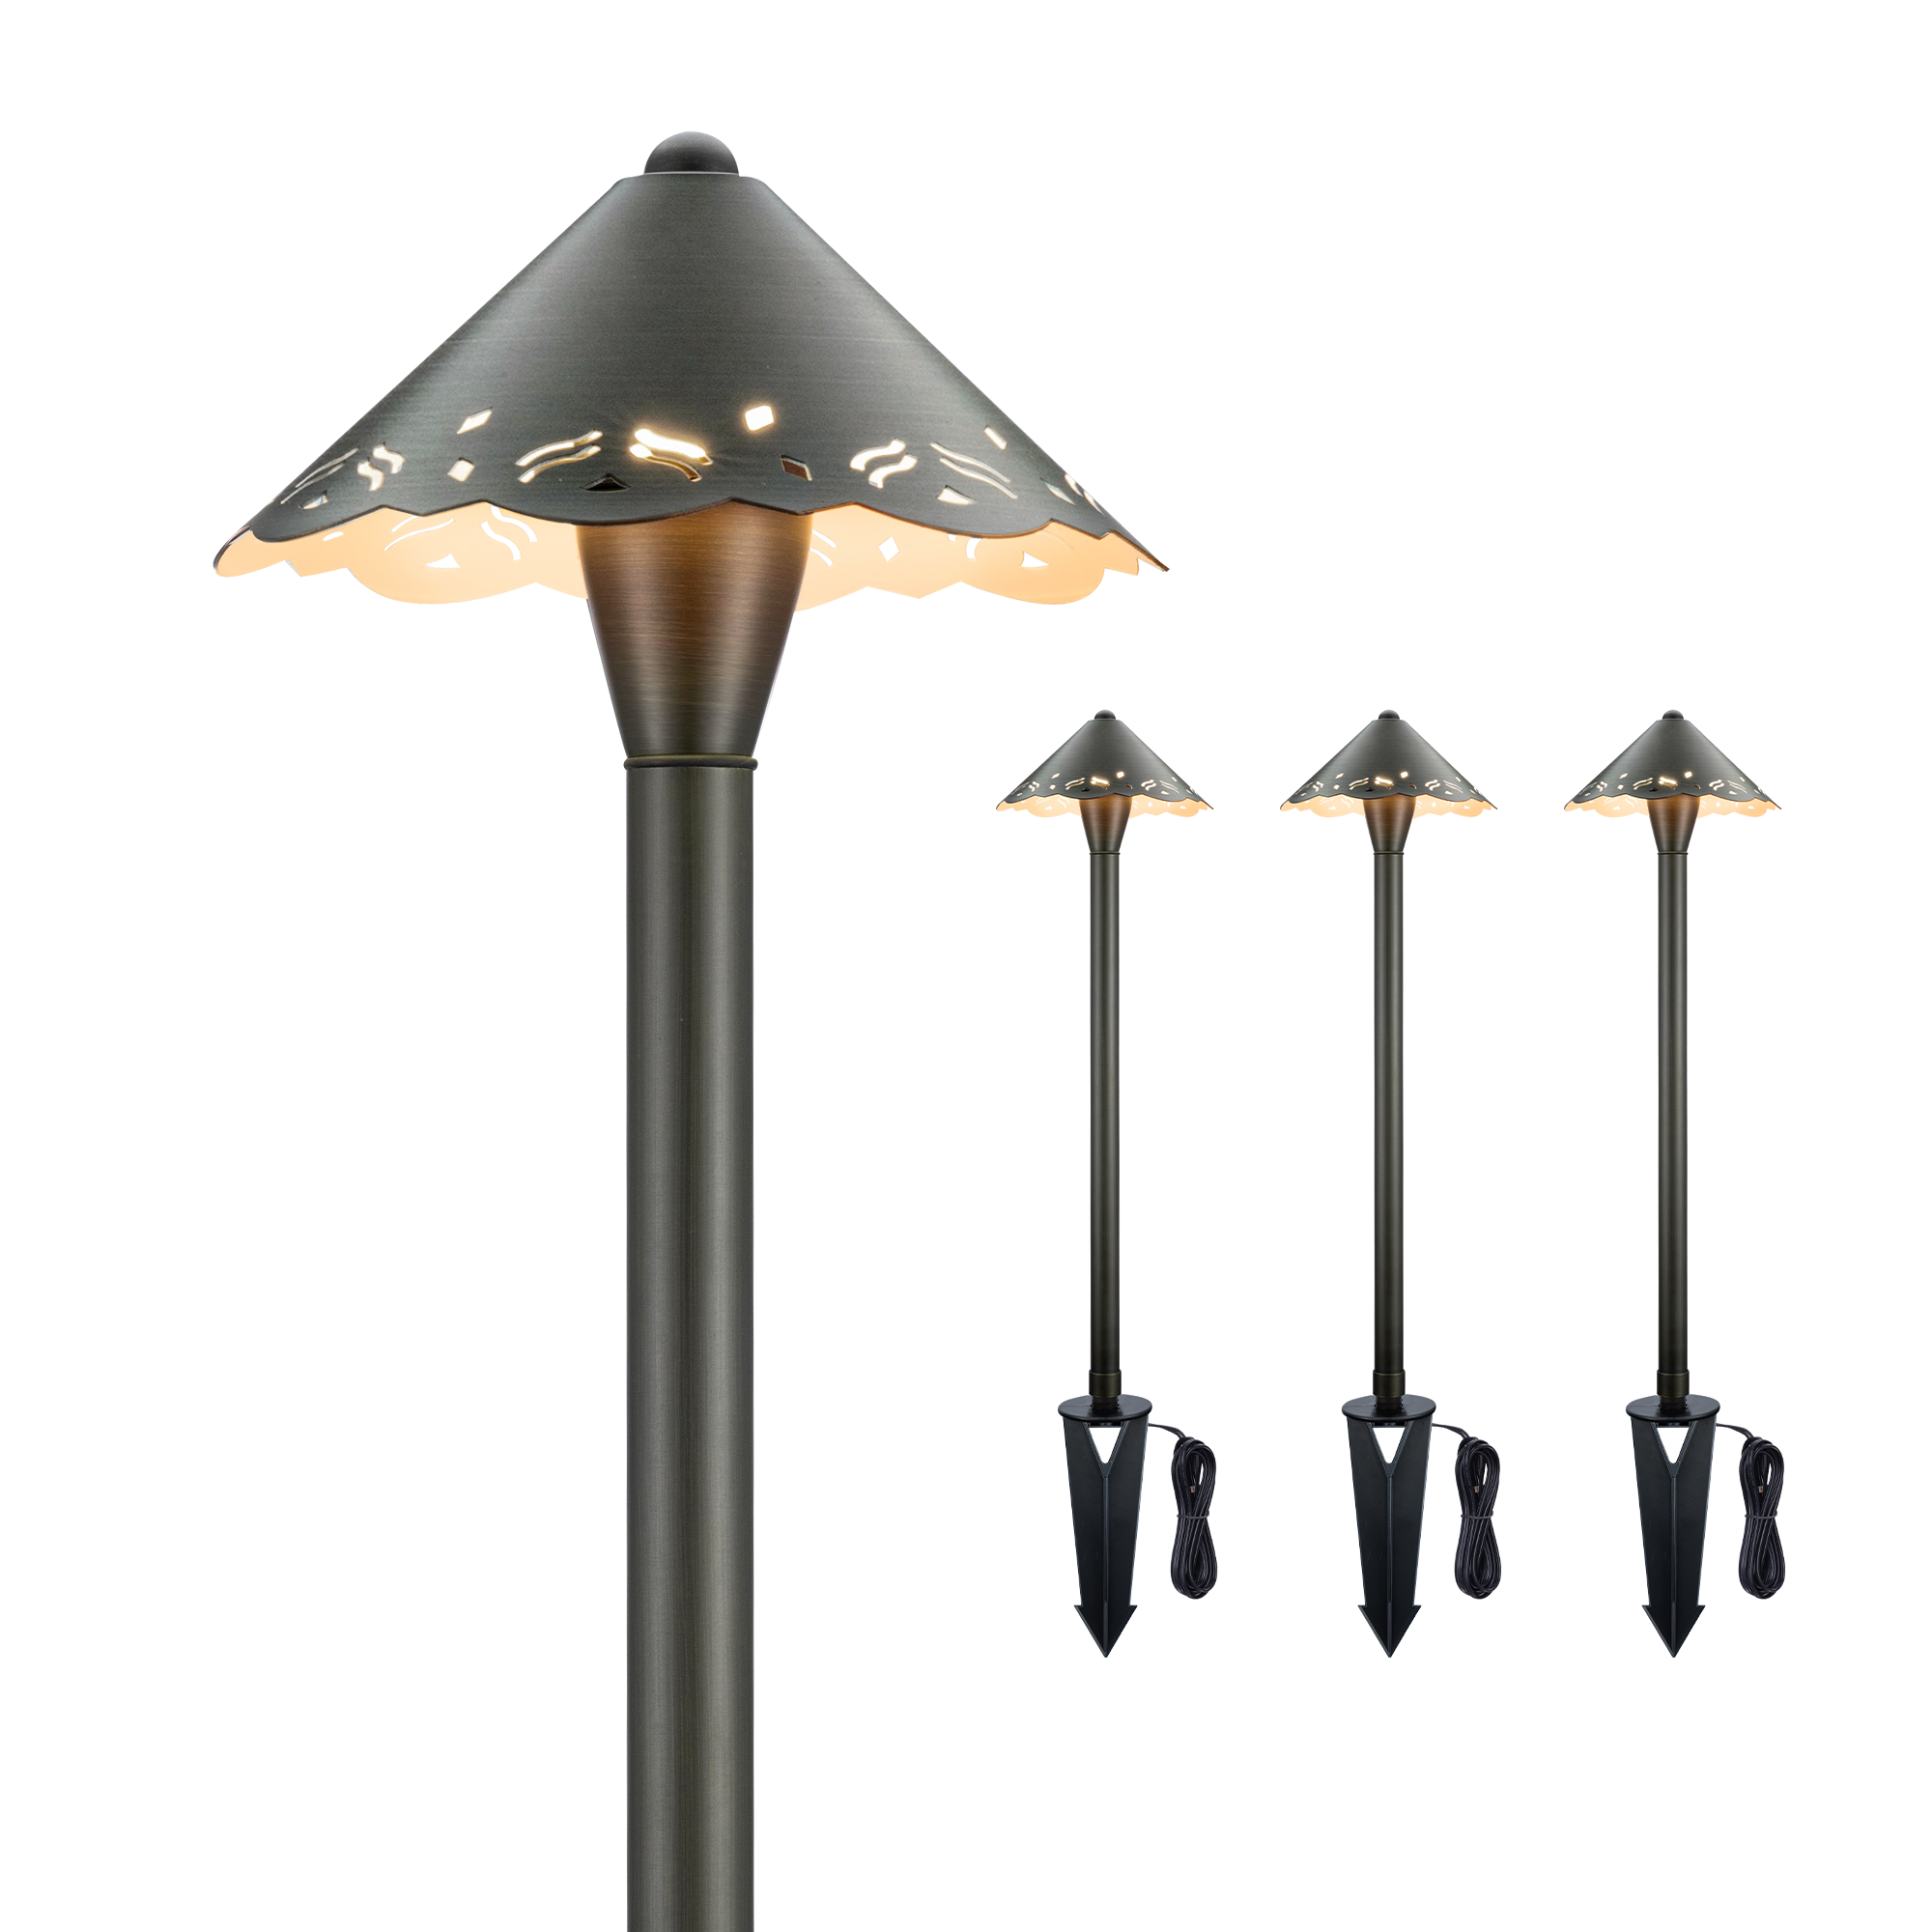 Gardenreet Brass Low Voltage Pathway Lights, 12V Outdoor LED Landscape Path Lights(Hat) for Walkway Driveway Garden Yard Without G4 Bulb(4 Pack) - image 1 of 7